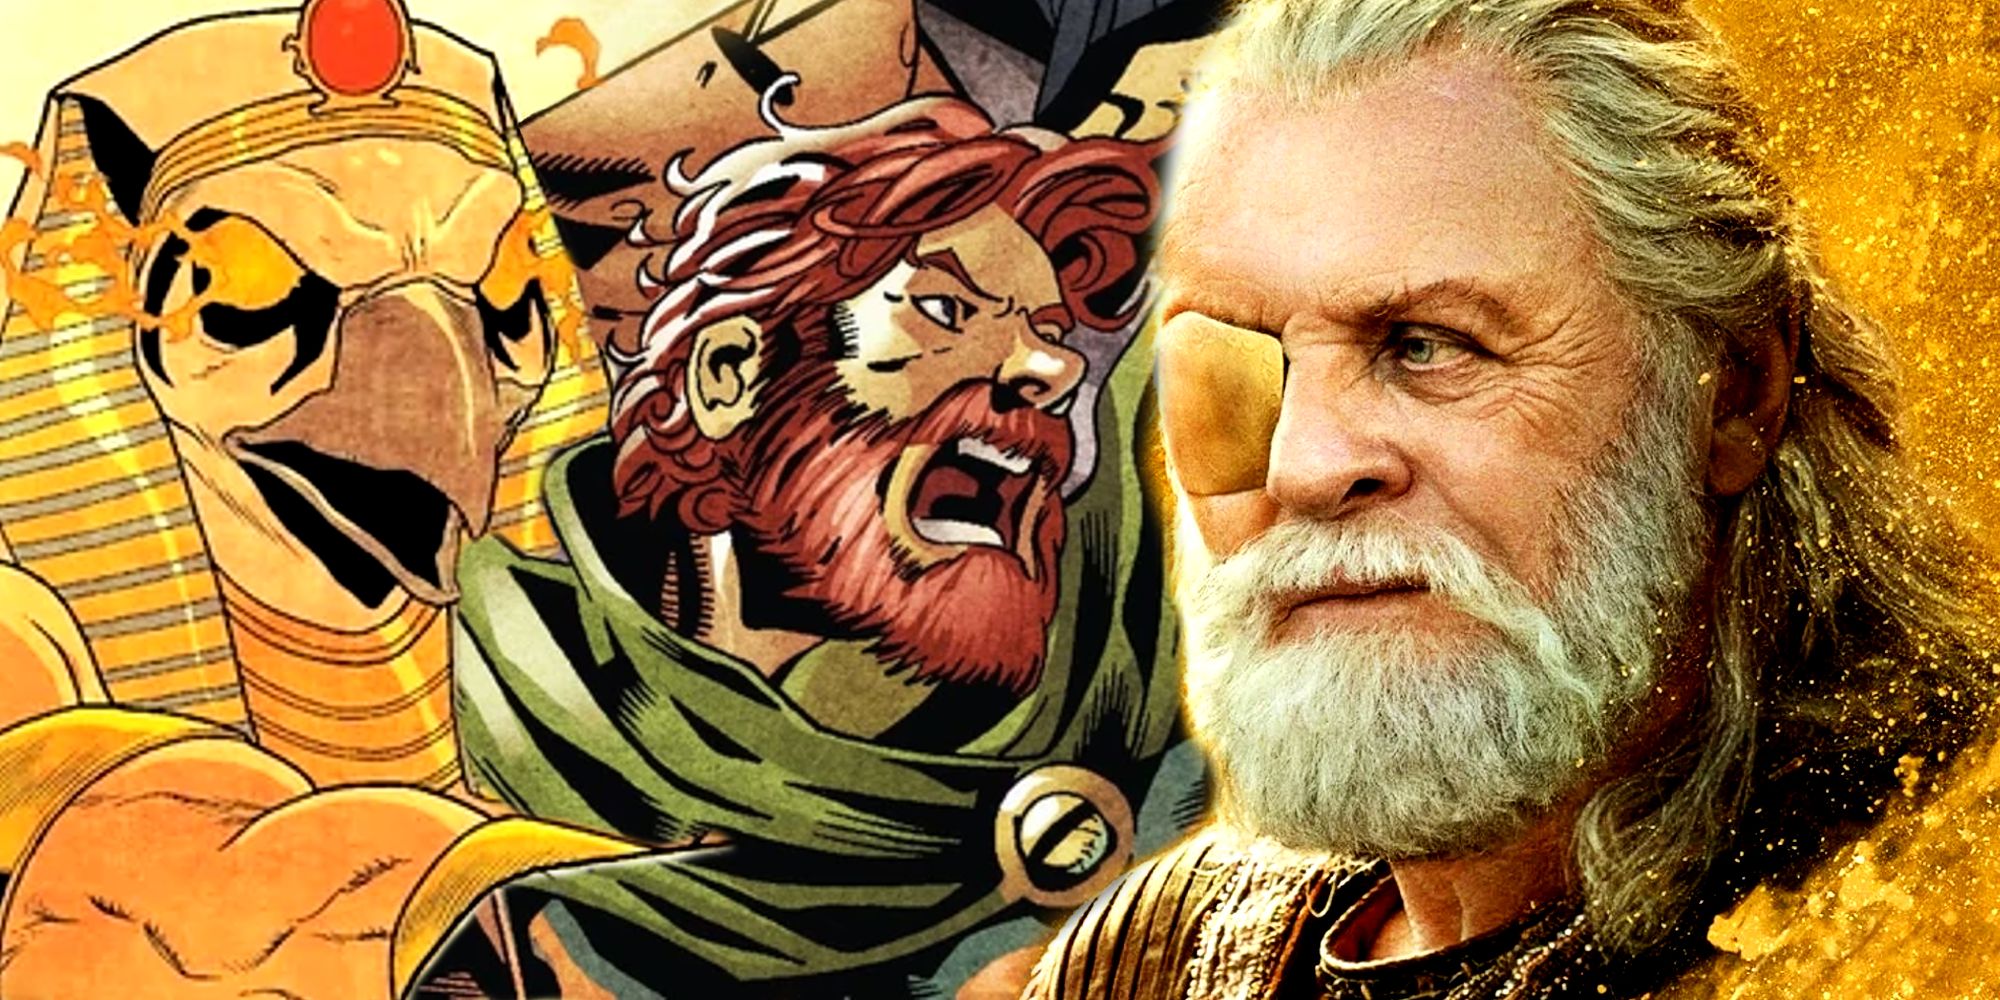 The Ultimate All-Father? Zeus VS Odin